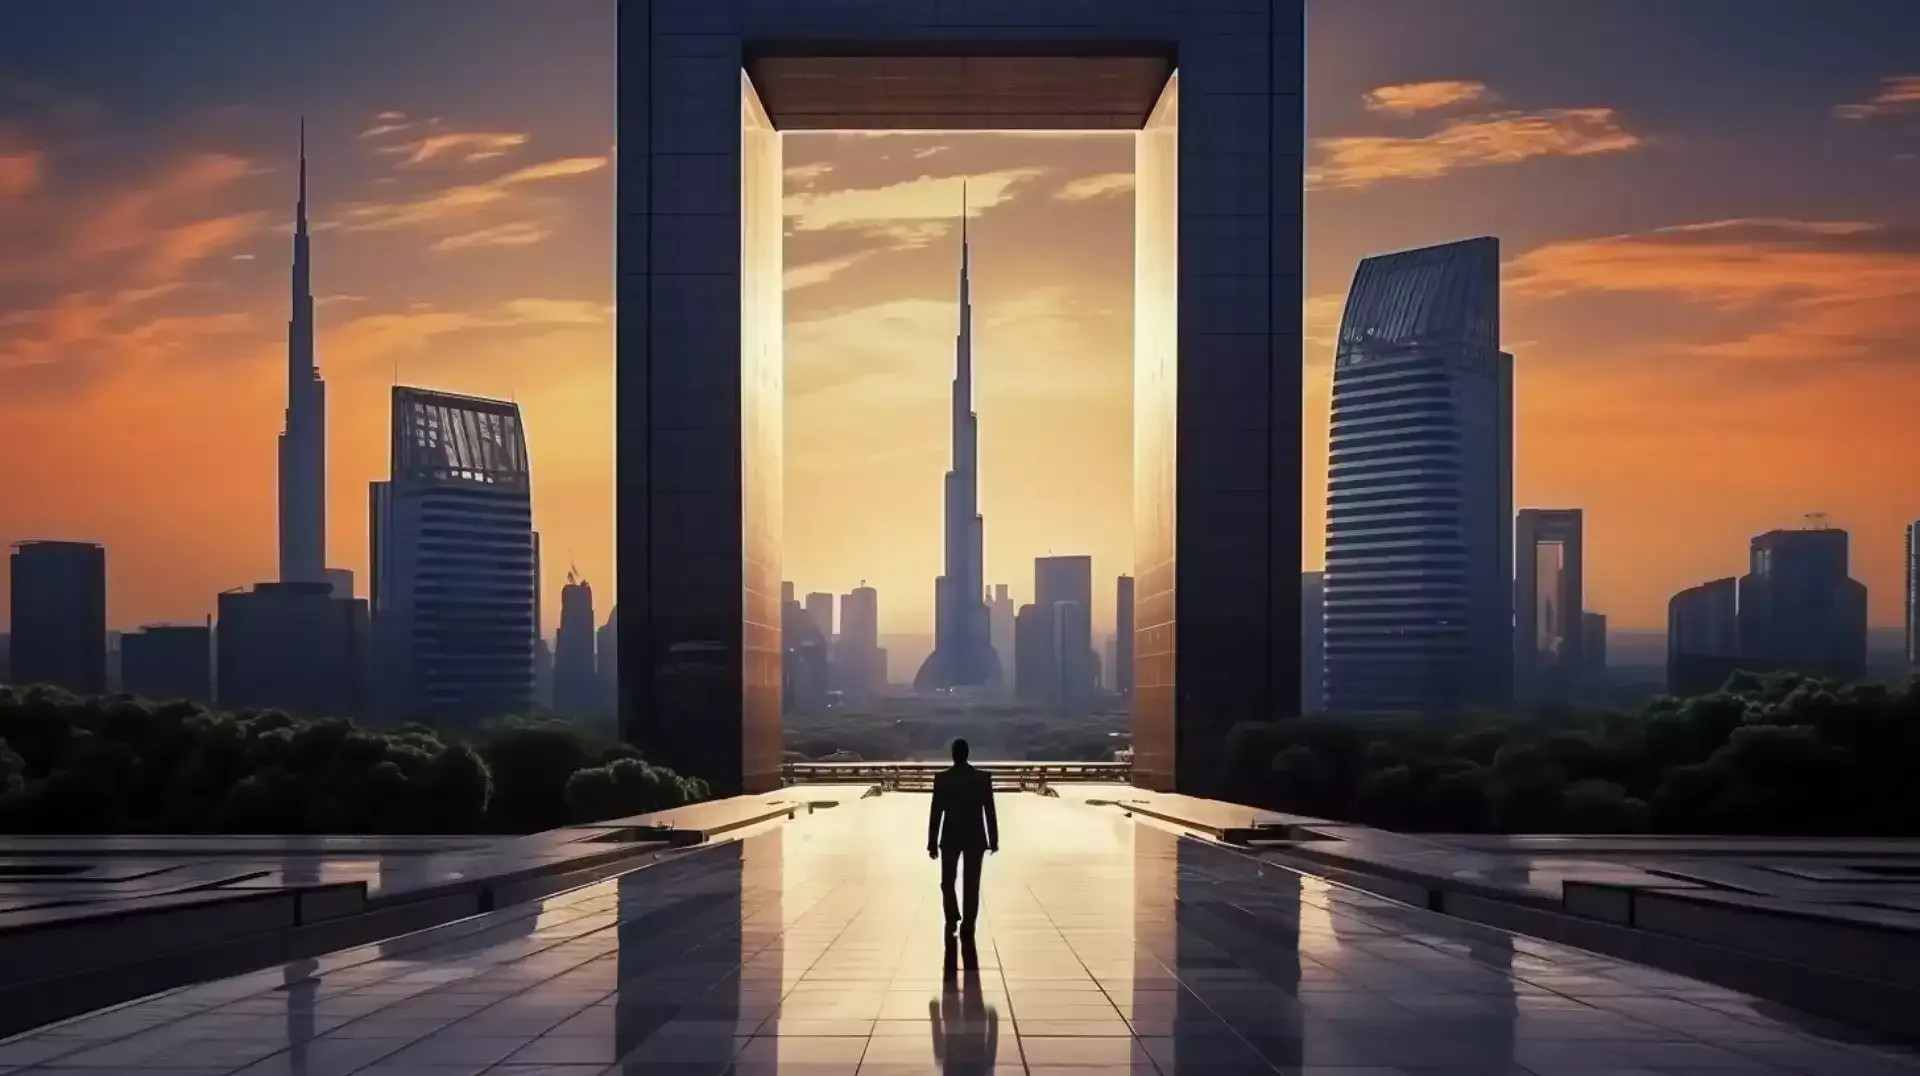 Taking the first steps towards starting a business in Dubai amidst architectural splendor